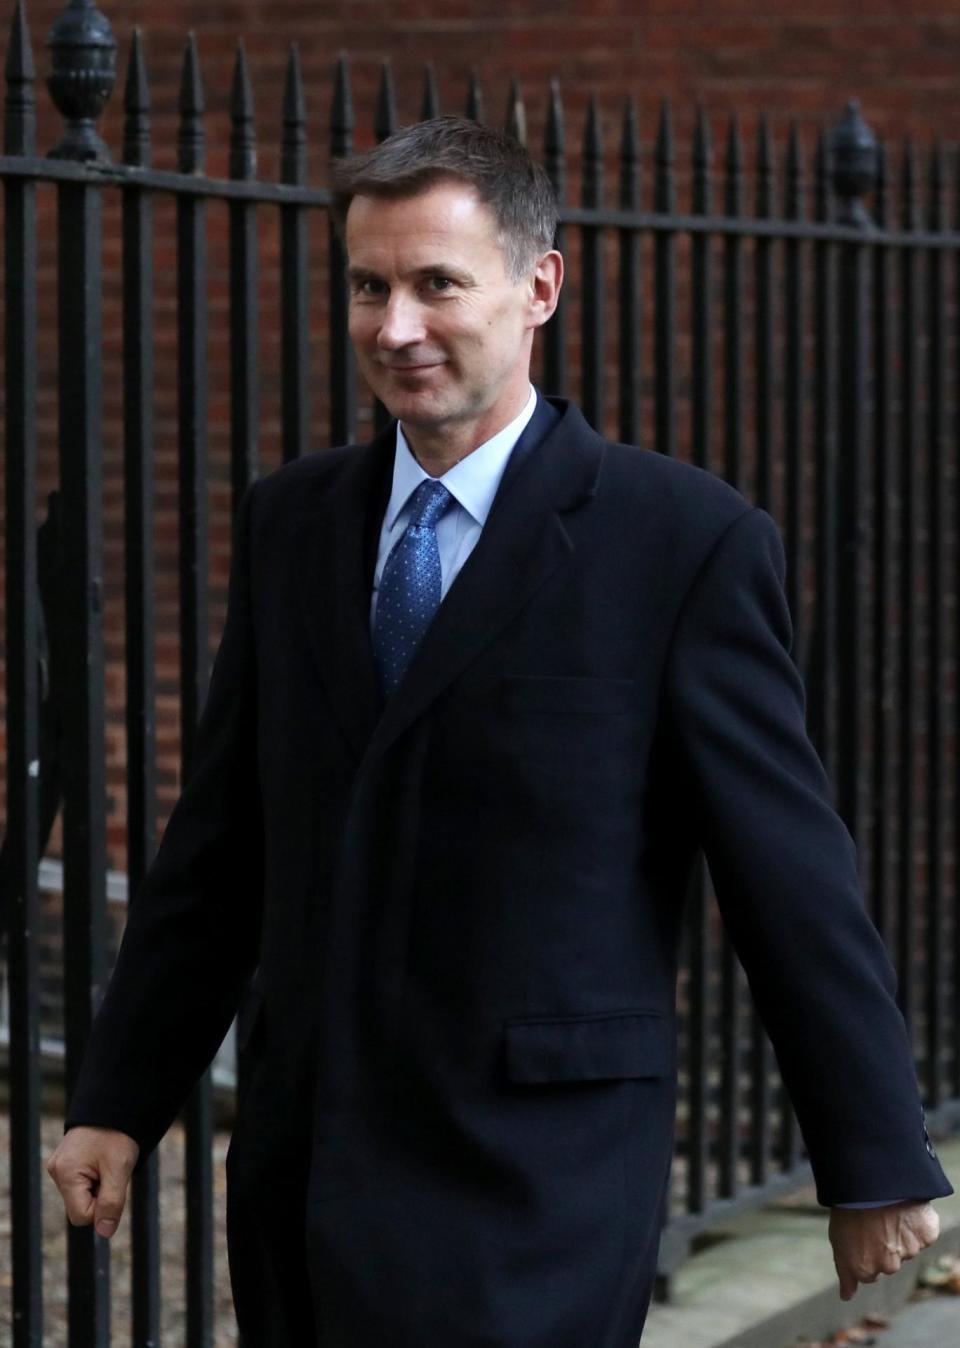 Jeremy Hunt pictured outside Downing Street on Tuesday (Simon Dawson/Reuters)